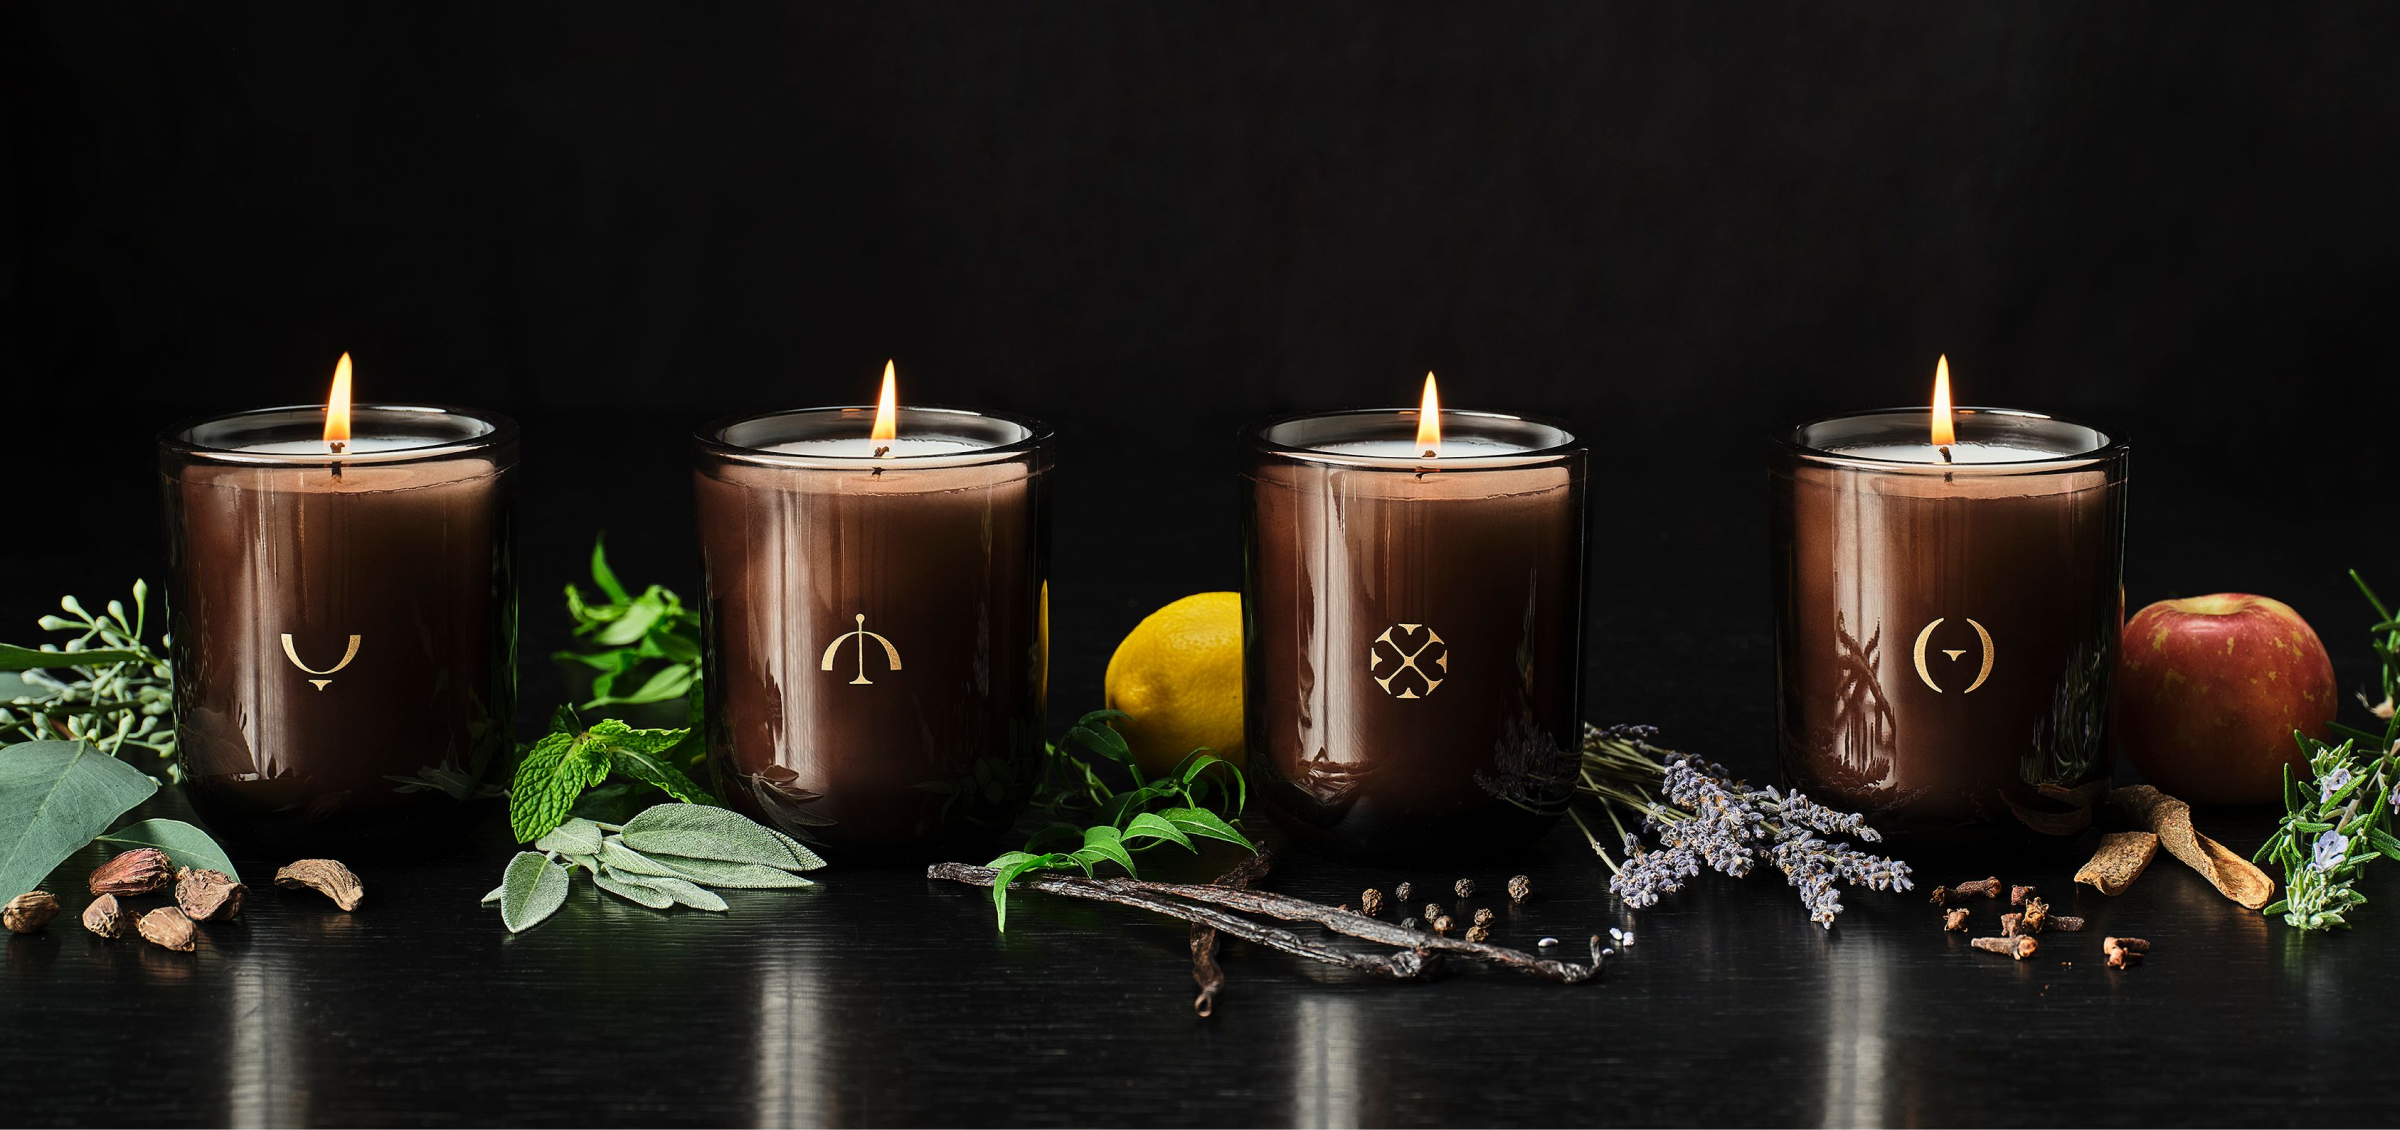 Photo of 4 seasonal candles with ingredients of their scents next to them